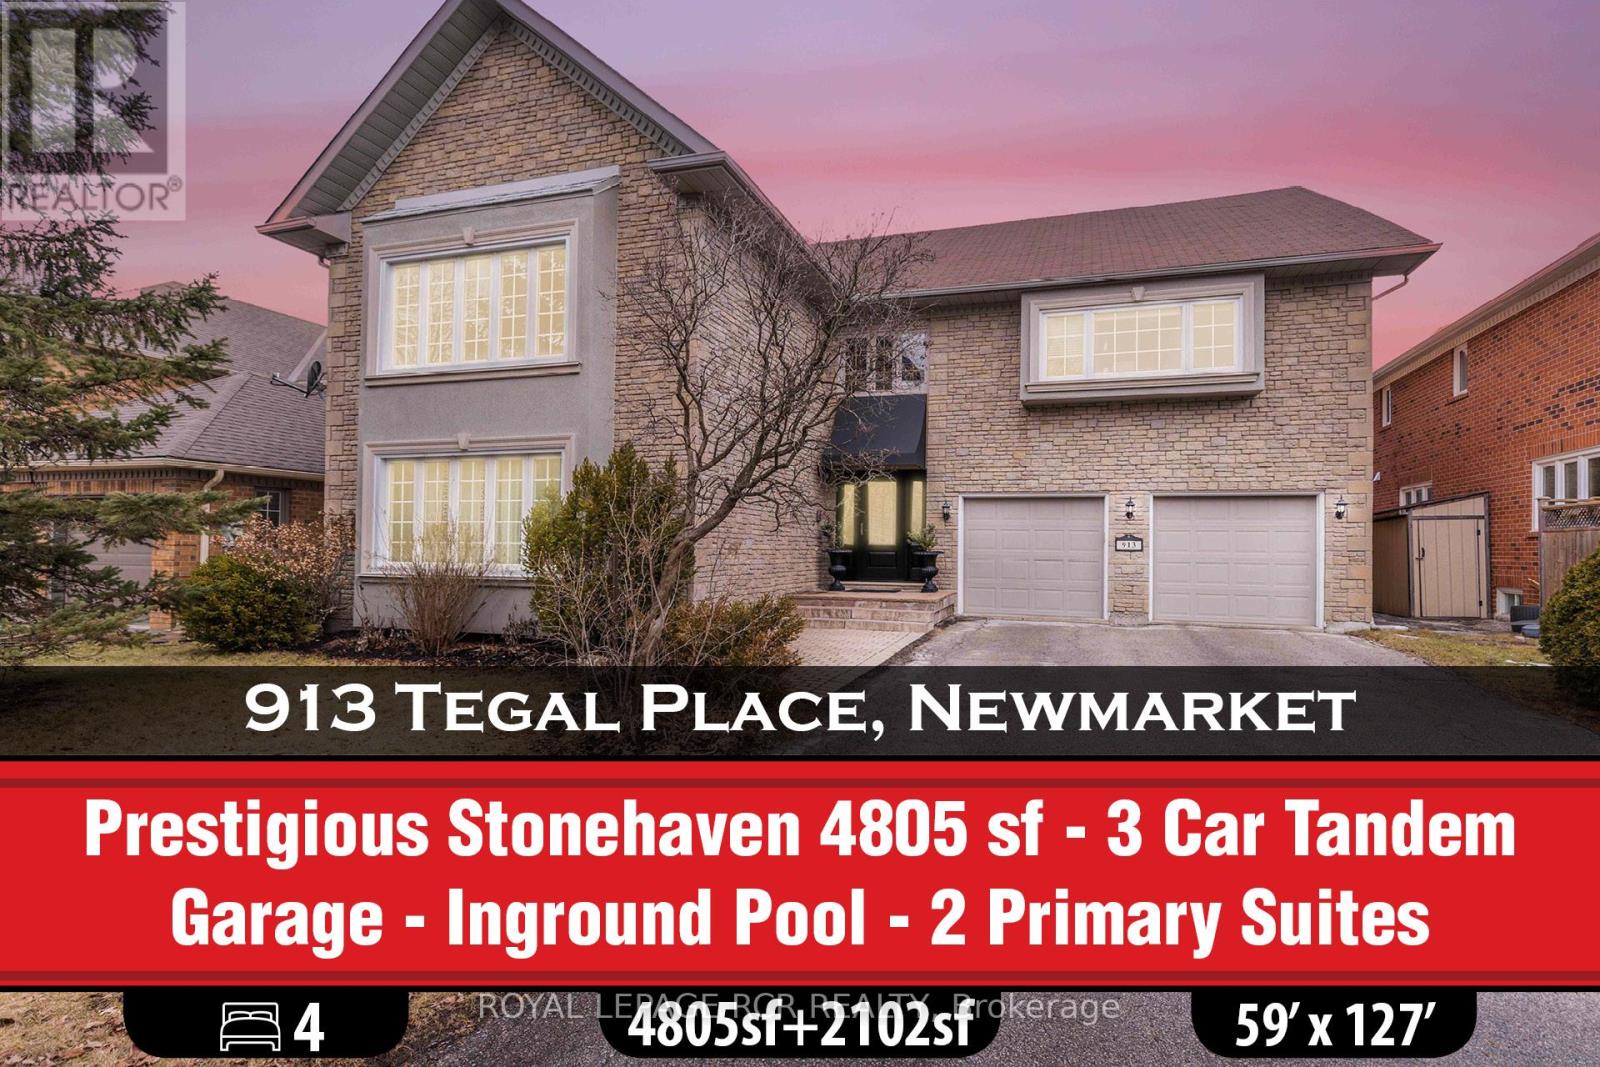 913 TEGAL PLACE, newmarket, Ontario